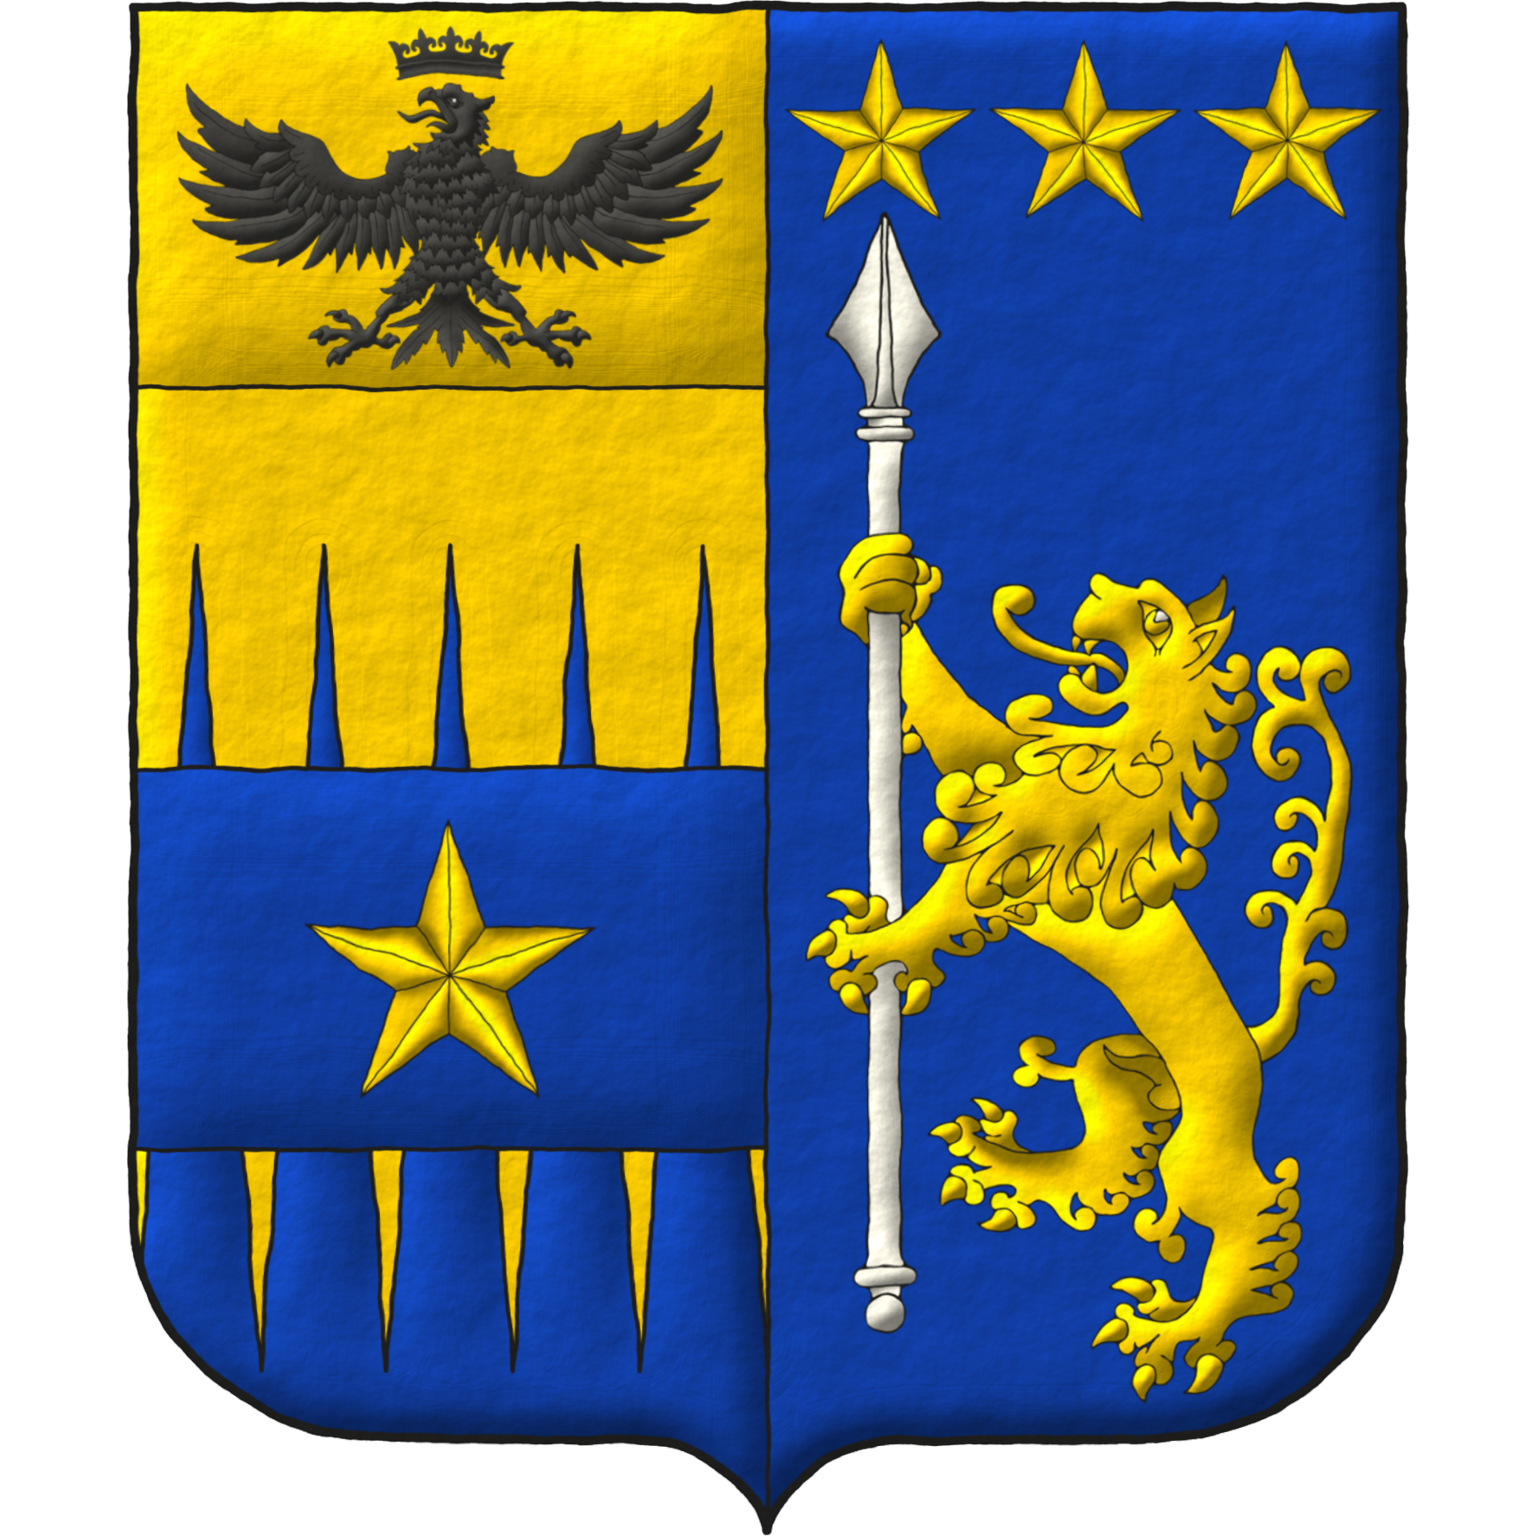 Party per pale: 1 per fess indented perlong Or and Azure overall on a fess Azure a mullet Or, and on a chief cousu Or an eagle displayed ensigned of a crown Sable; 2 Azure a lion rampant Or supporting a lance palewise Argent, in chief three mullets Or.